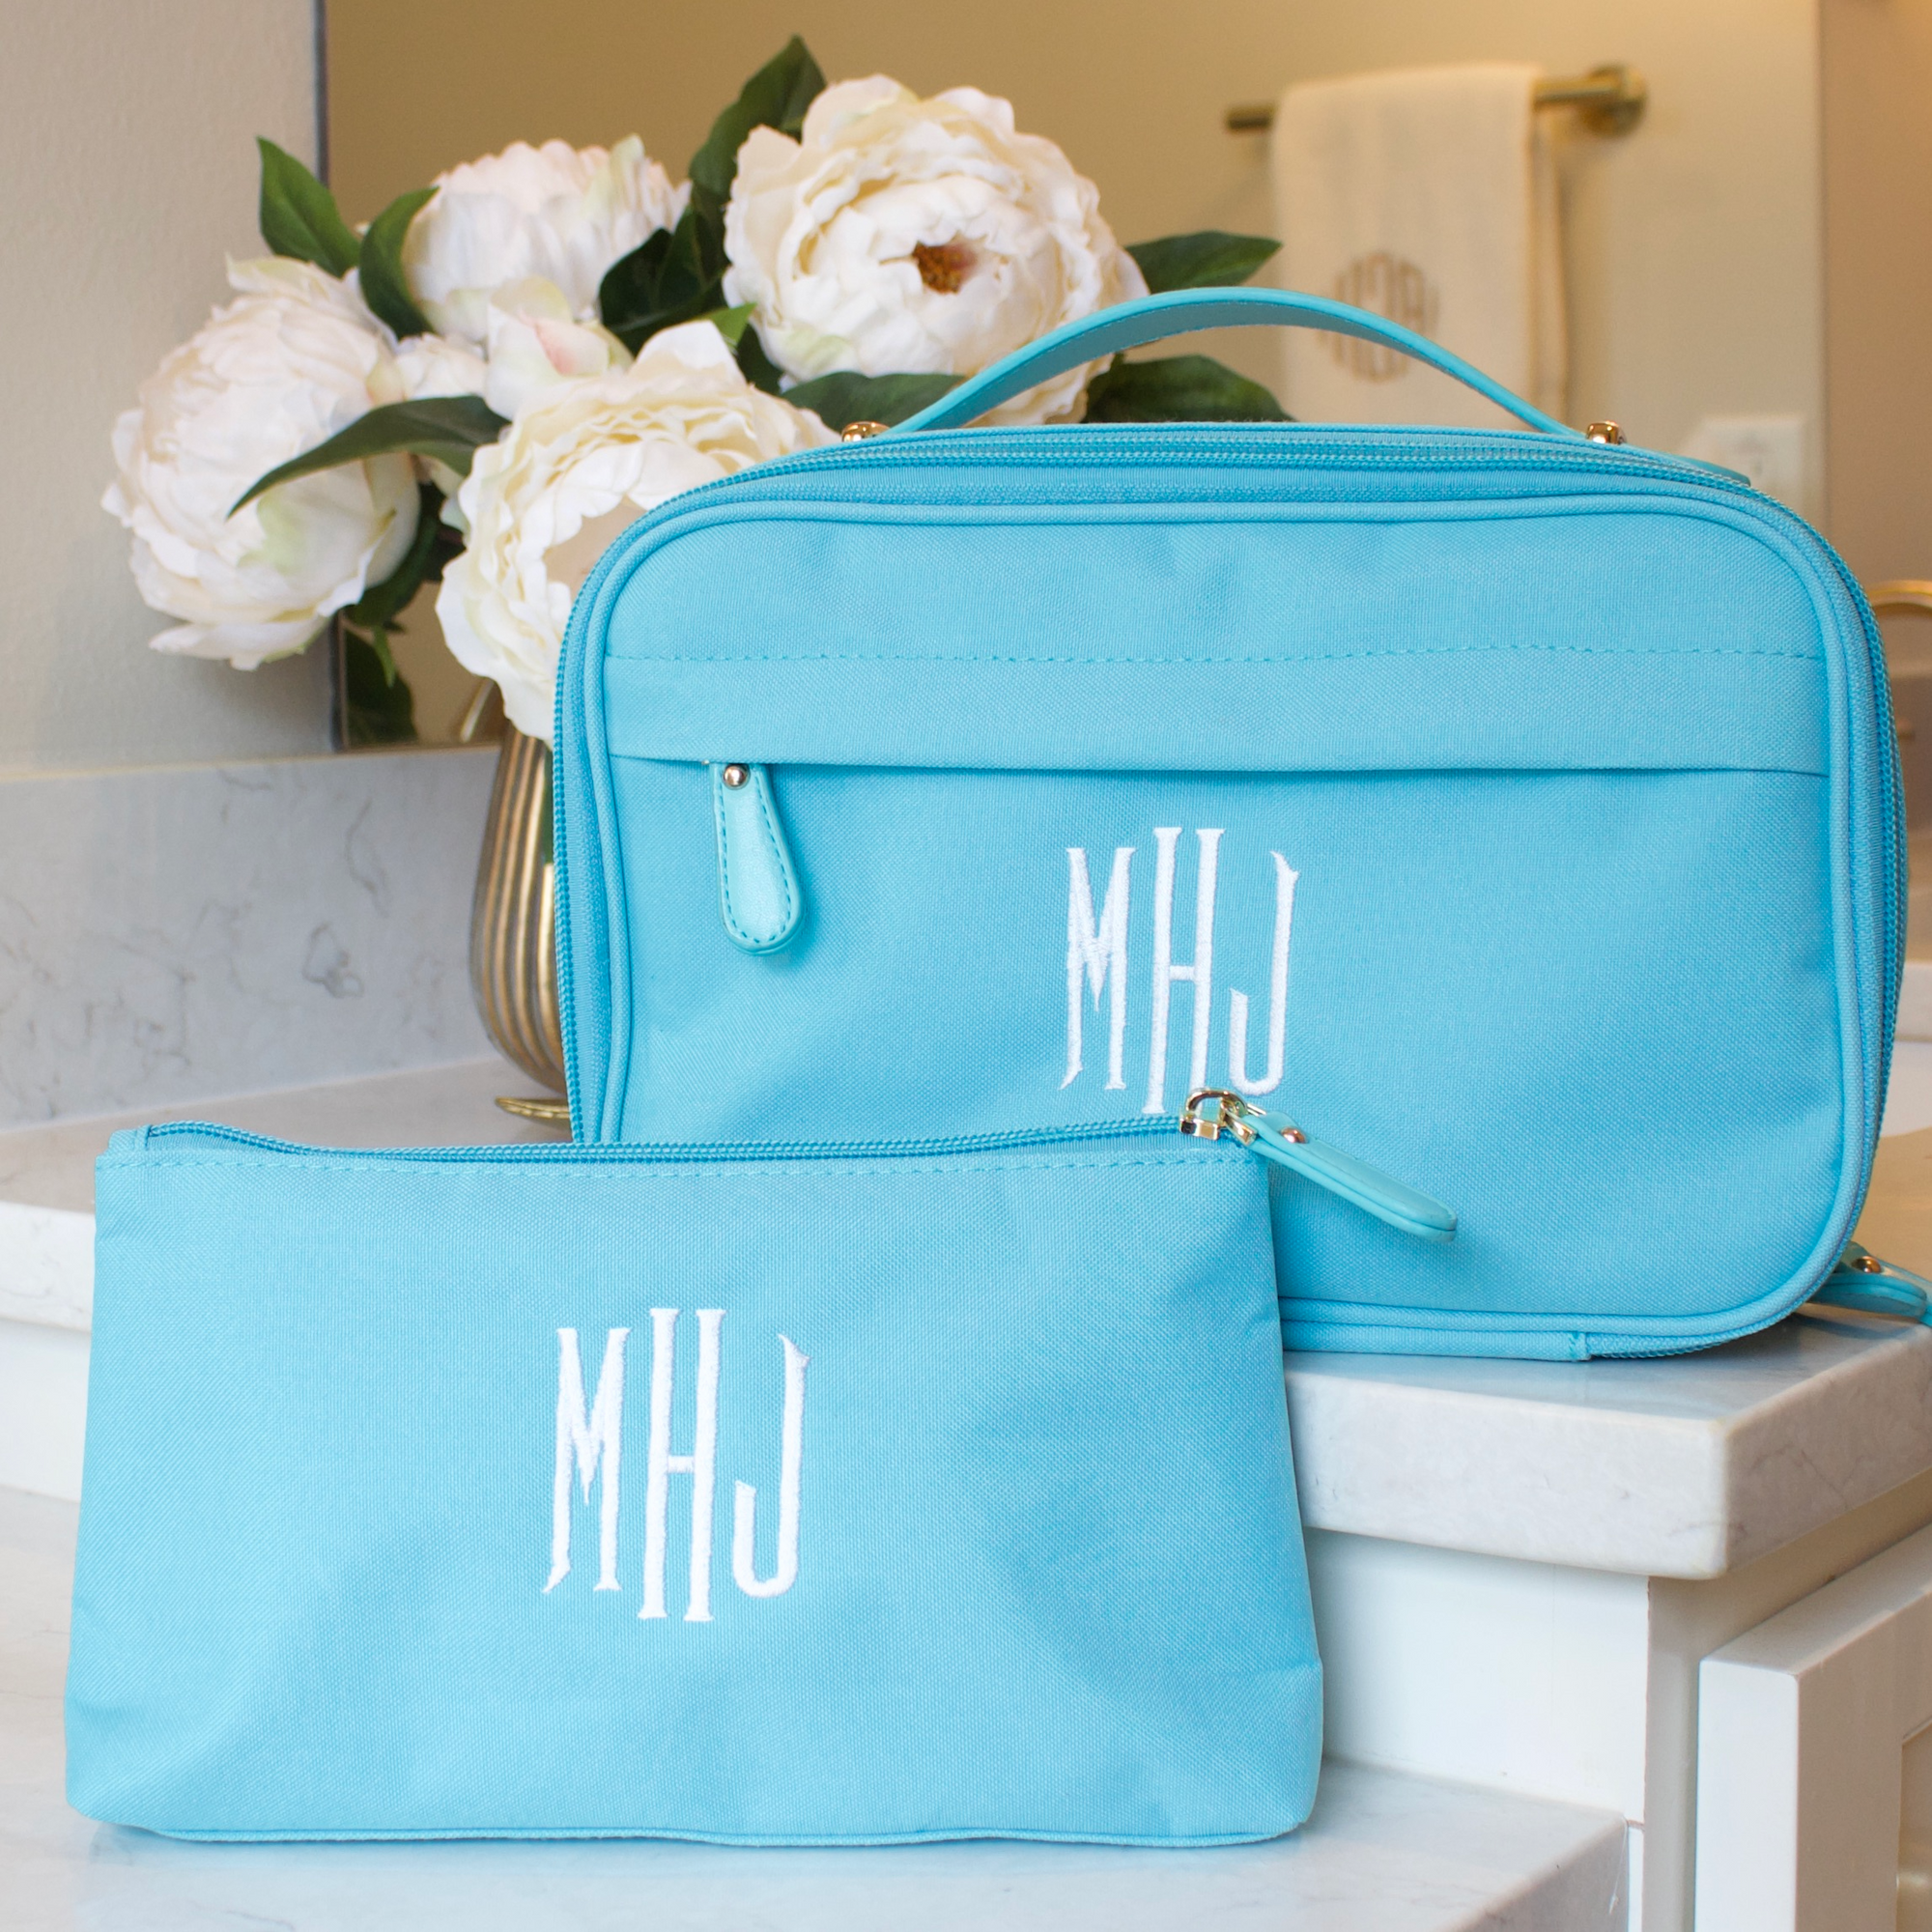 Personalized Toiletry Bag and Makeup Bag Turquoise